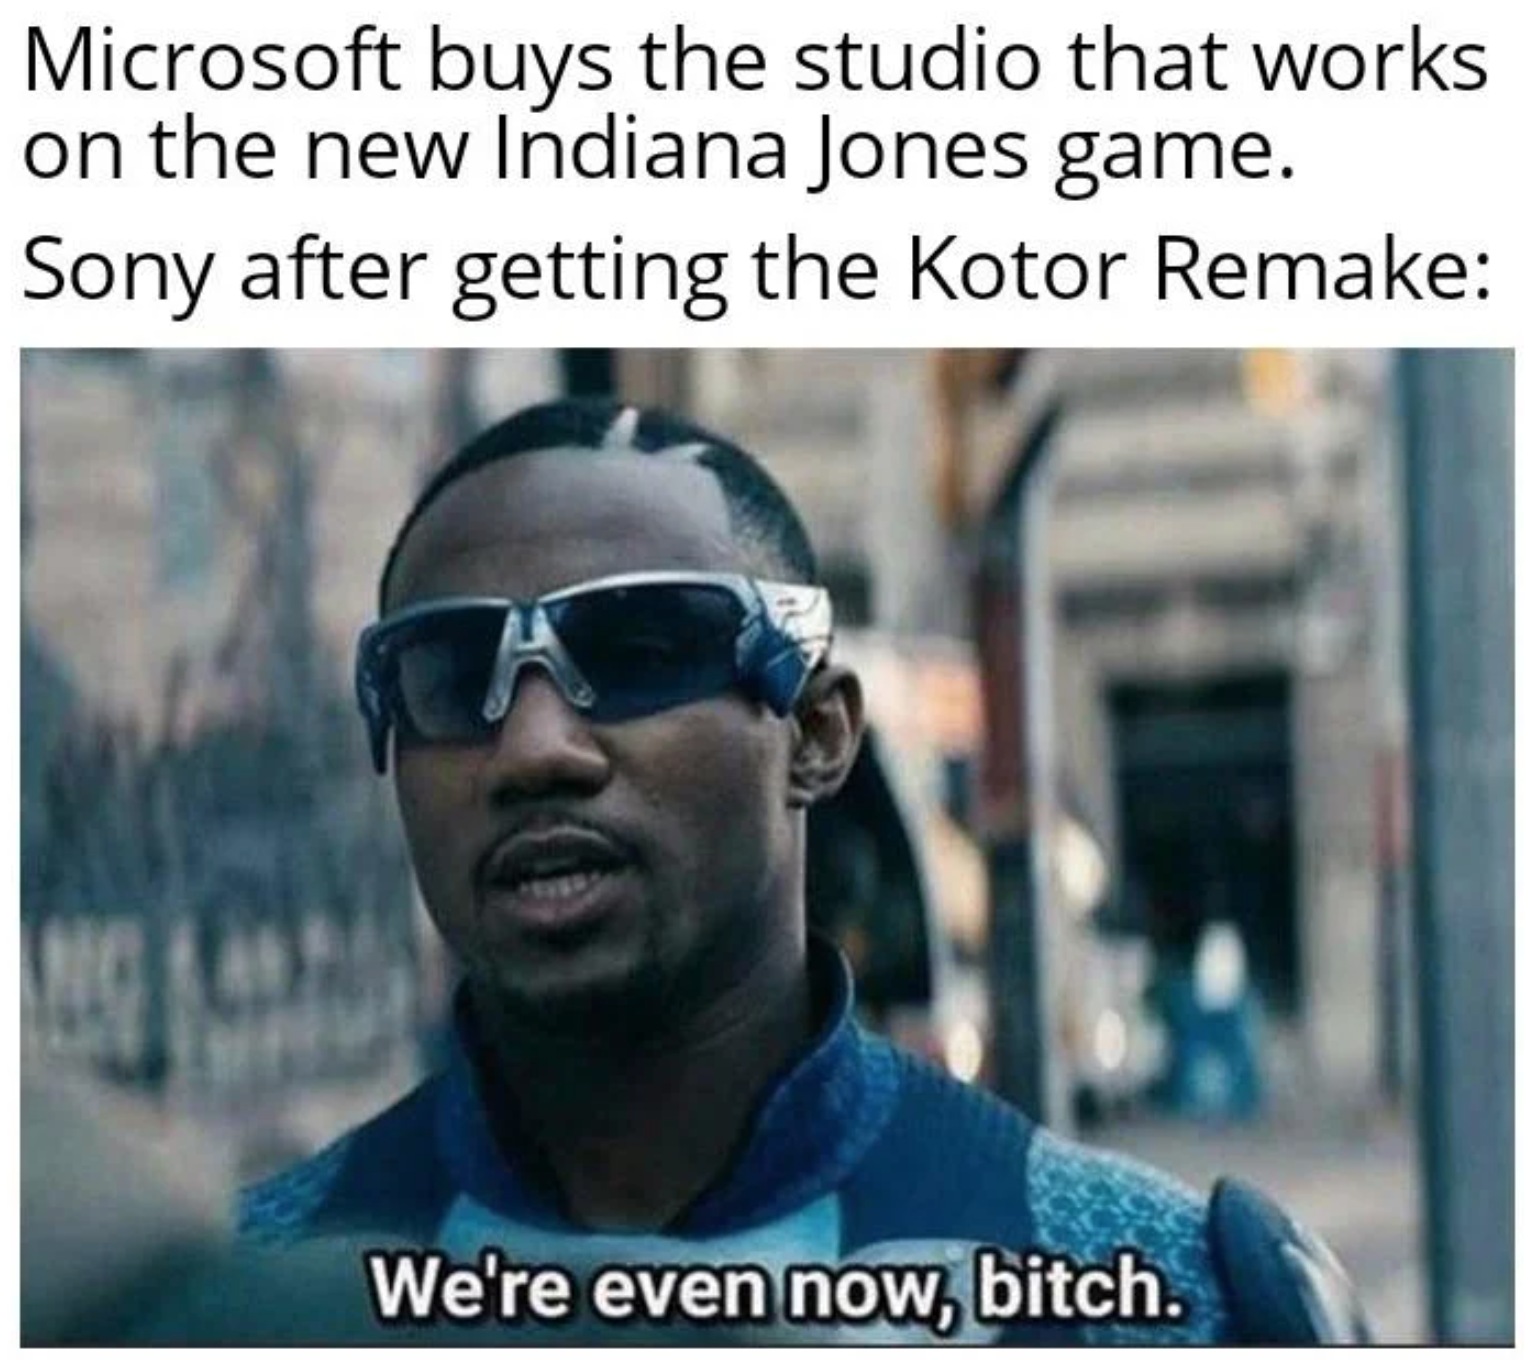 funny gaming memes - best revenge meme - Microsoft buys the studio that works on the new Indiana Jones game. Sony after getting the Kotor Remake We're even now, bitch.